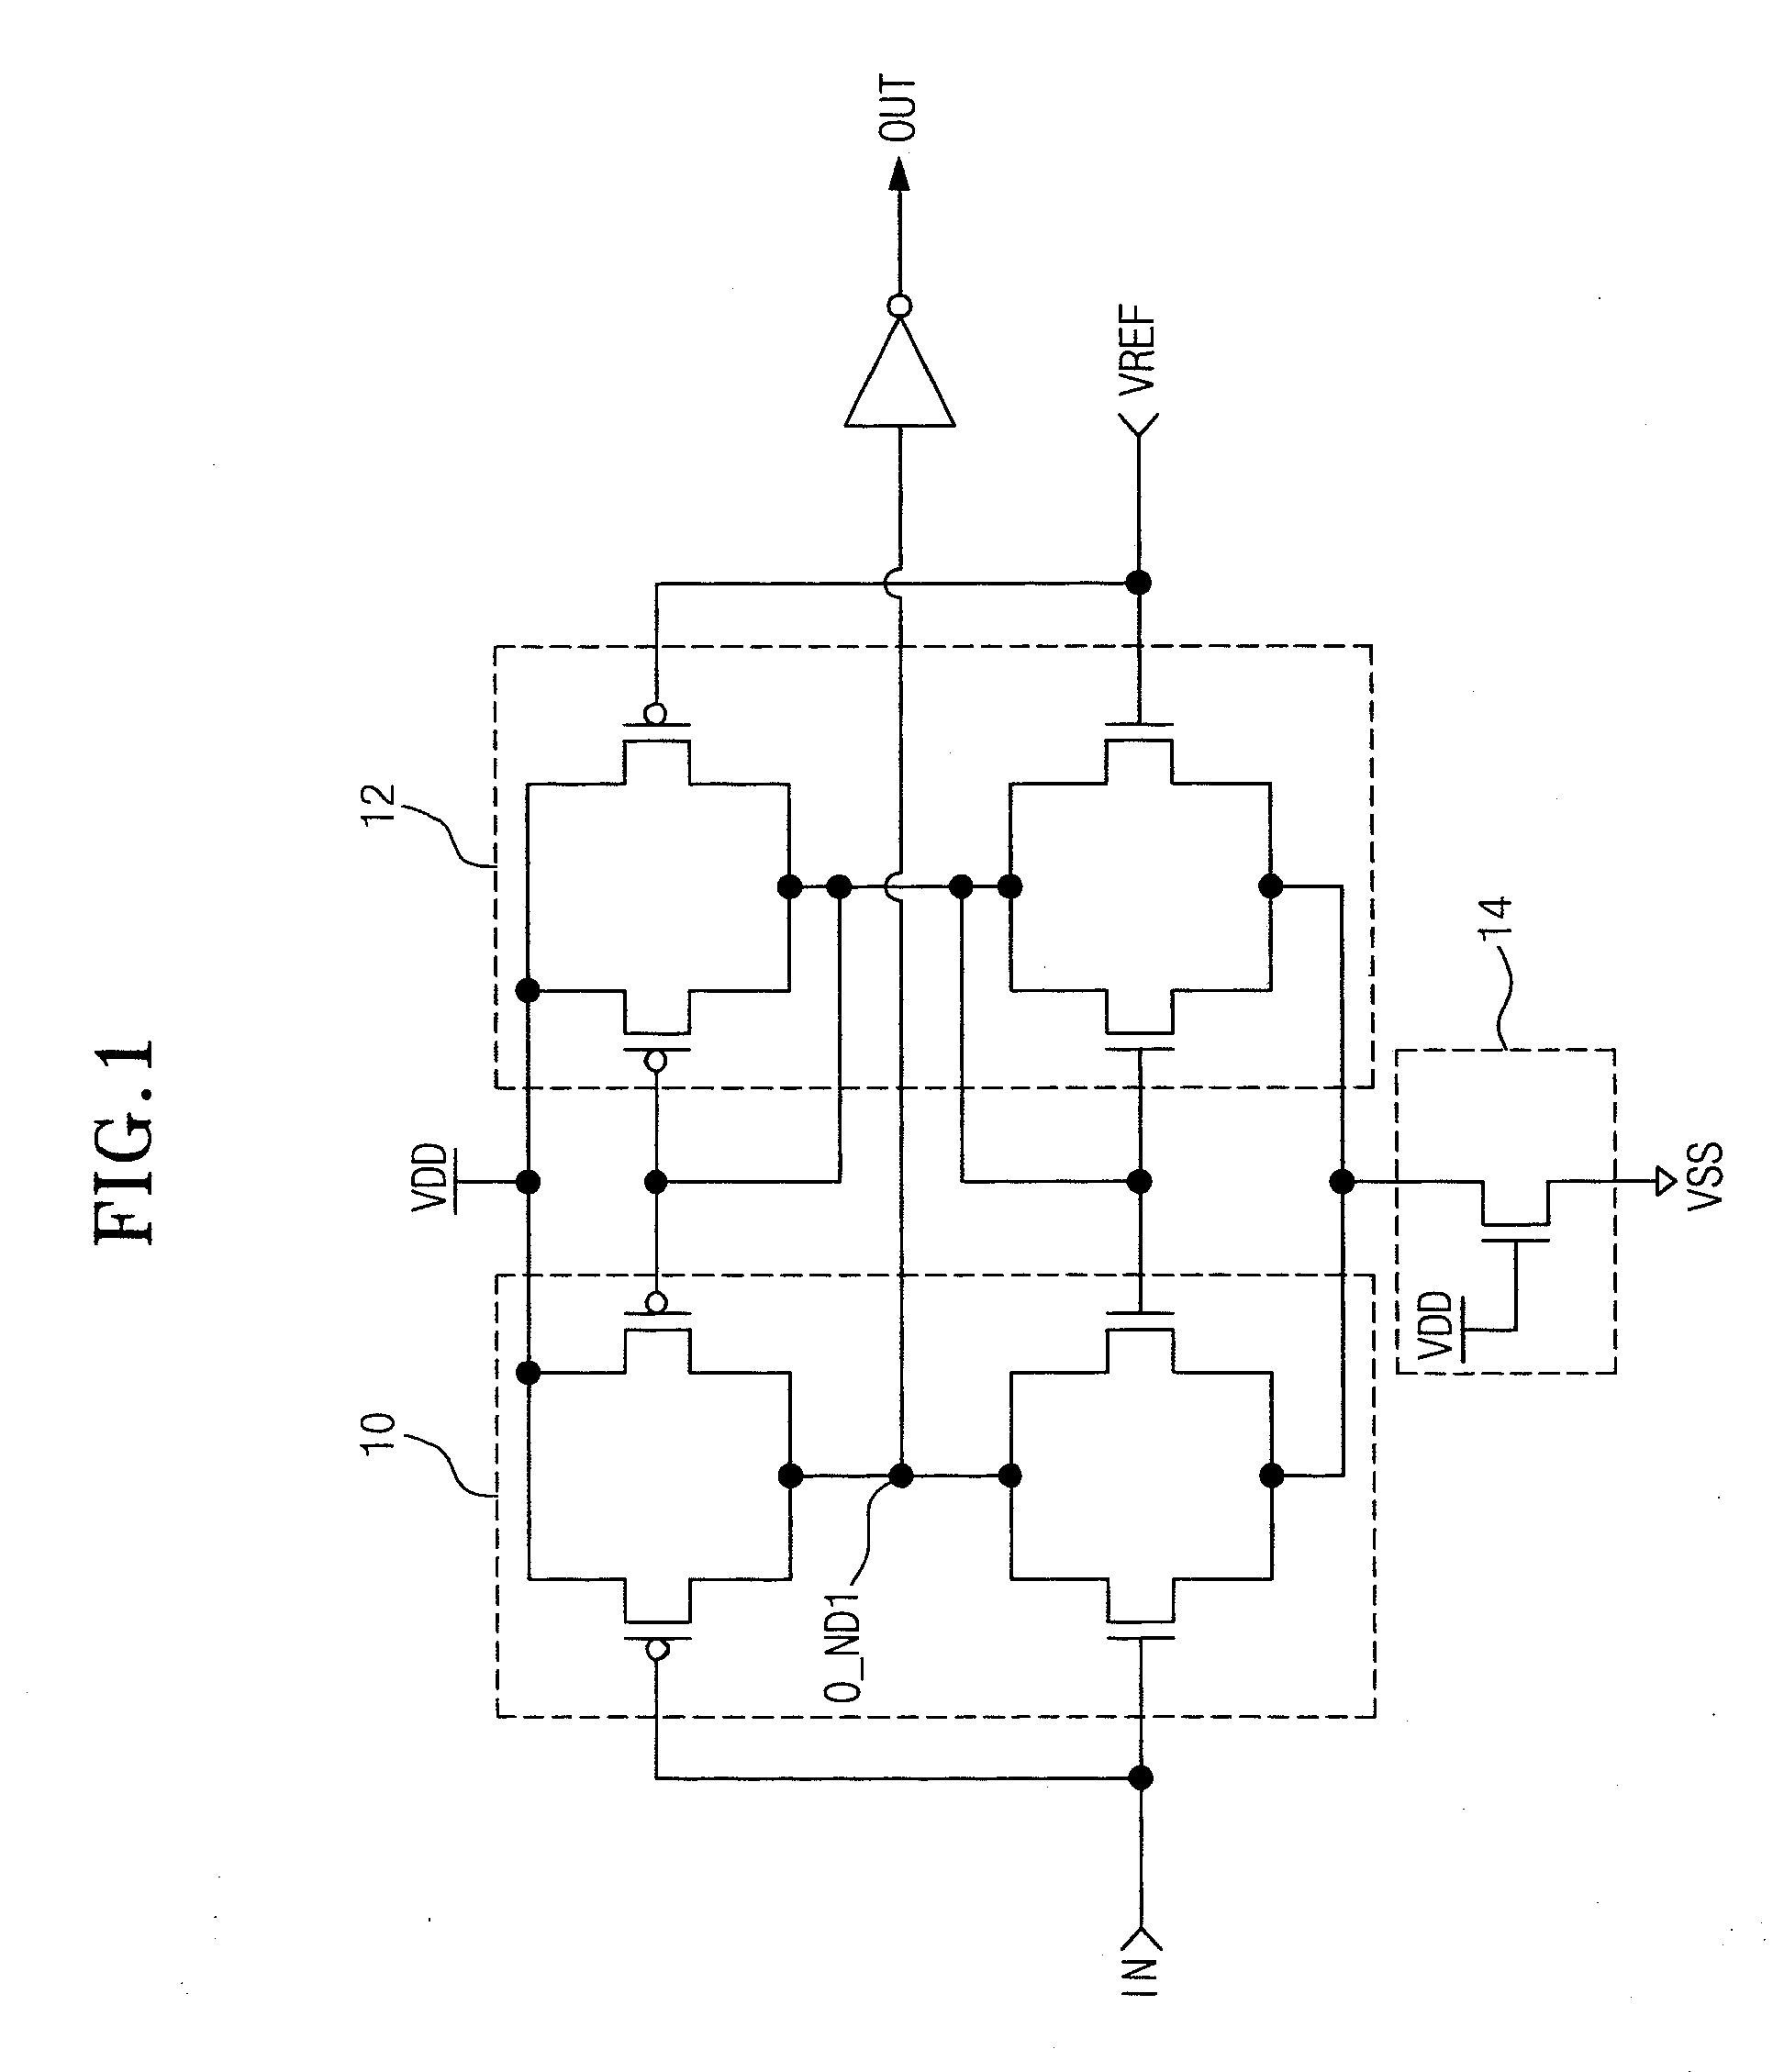 Buffer circuit which occupies less area in a semiconductor device